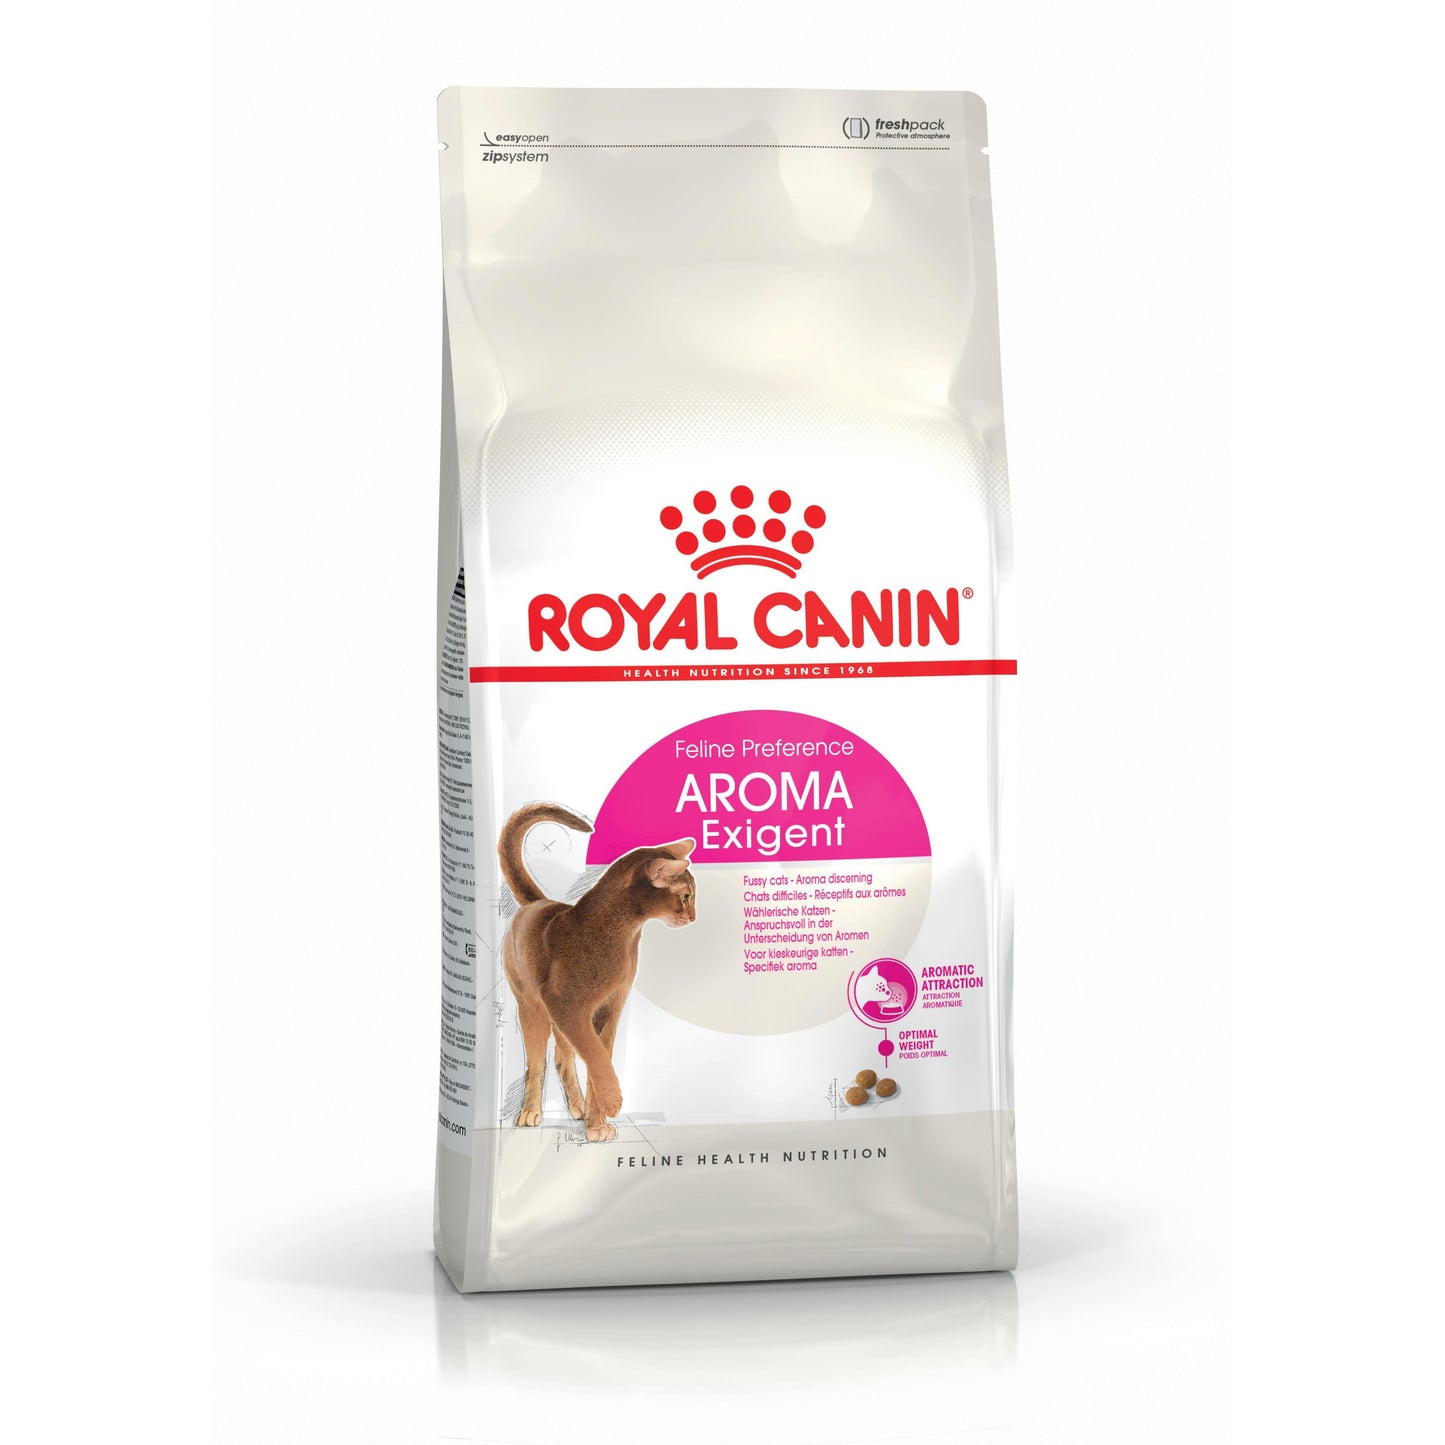 Royal Canin Aroma Exigent Attraction Dry Cat Food